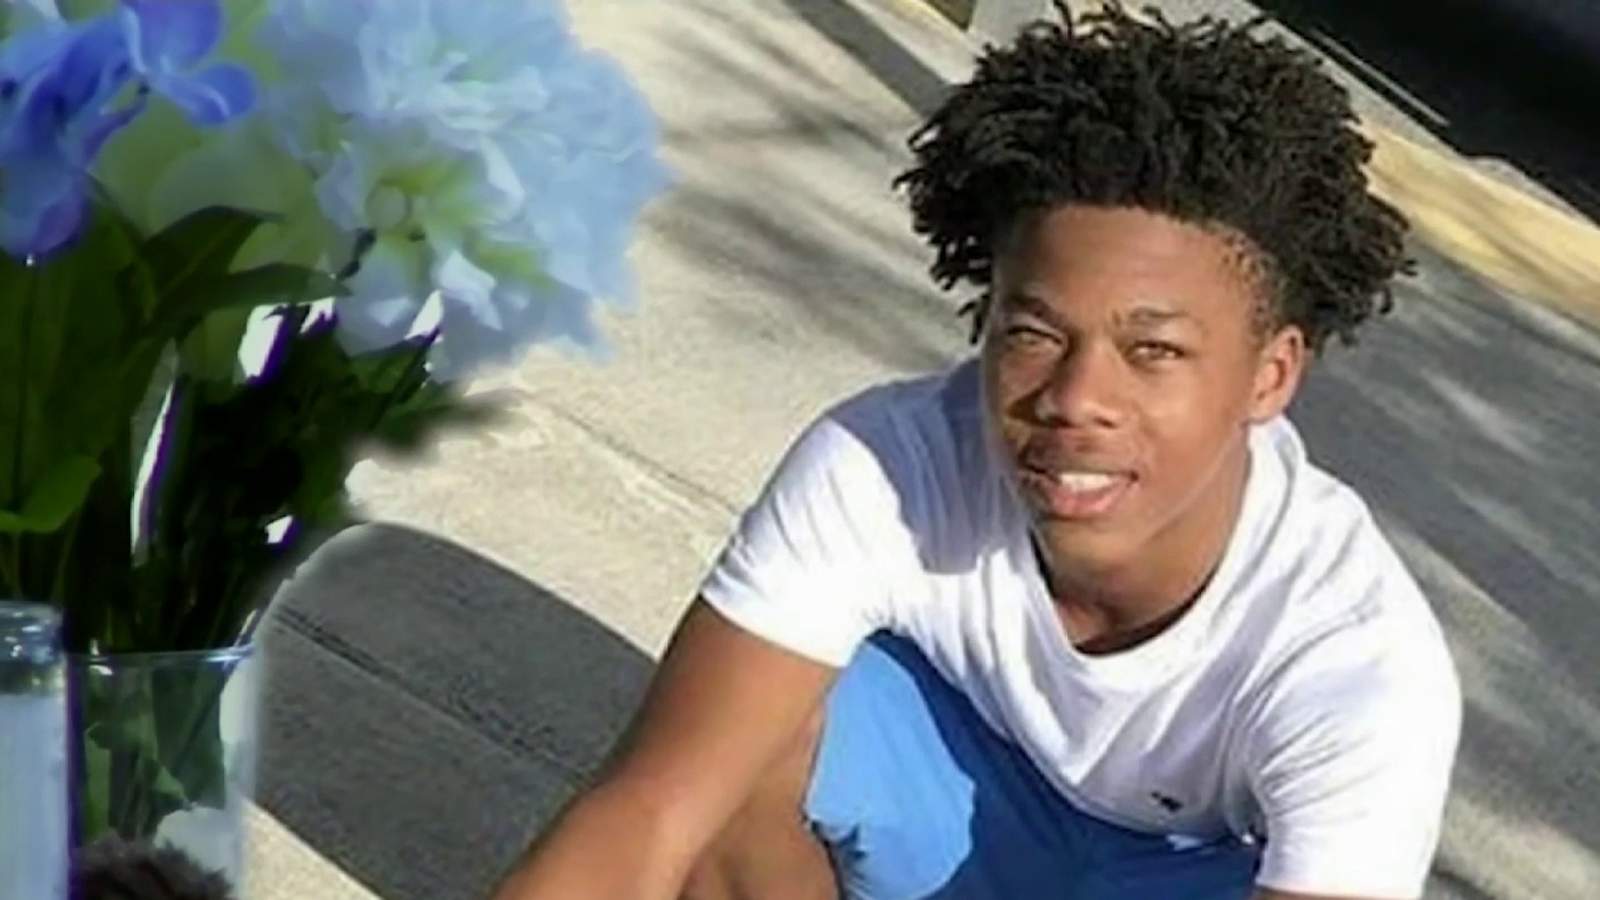 UPDATE: Police release name of teen shot and killed in Orlando